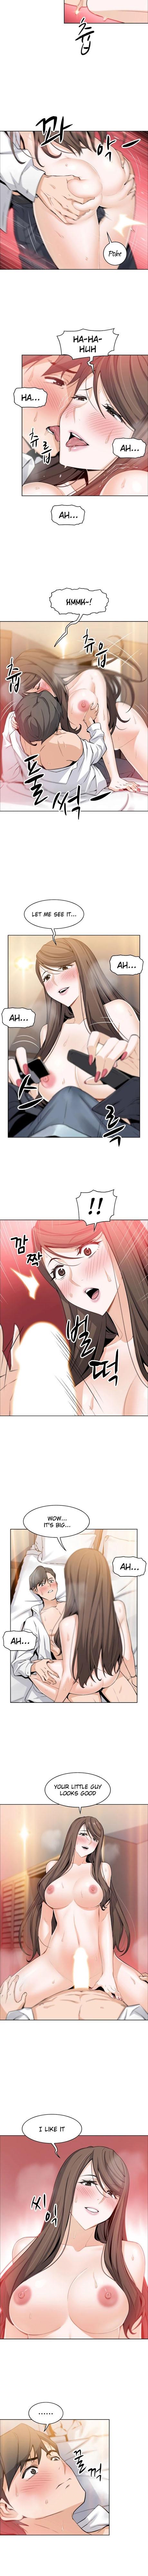 Housekeeper [Neck Pillow, Paper] Ch.49/49 [English] [Manhwa PDF] Completed 74